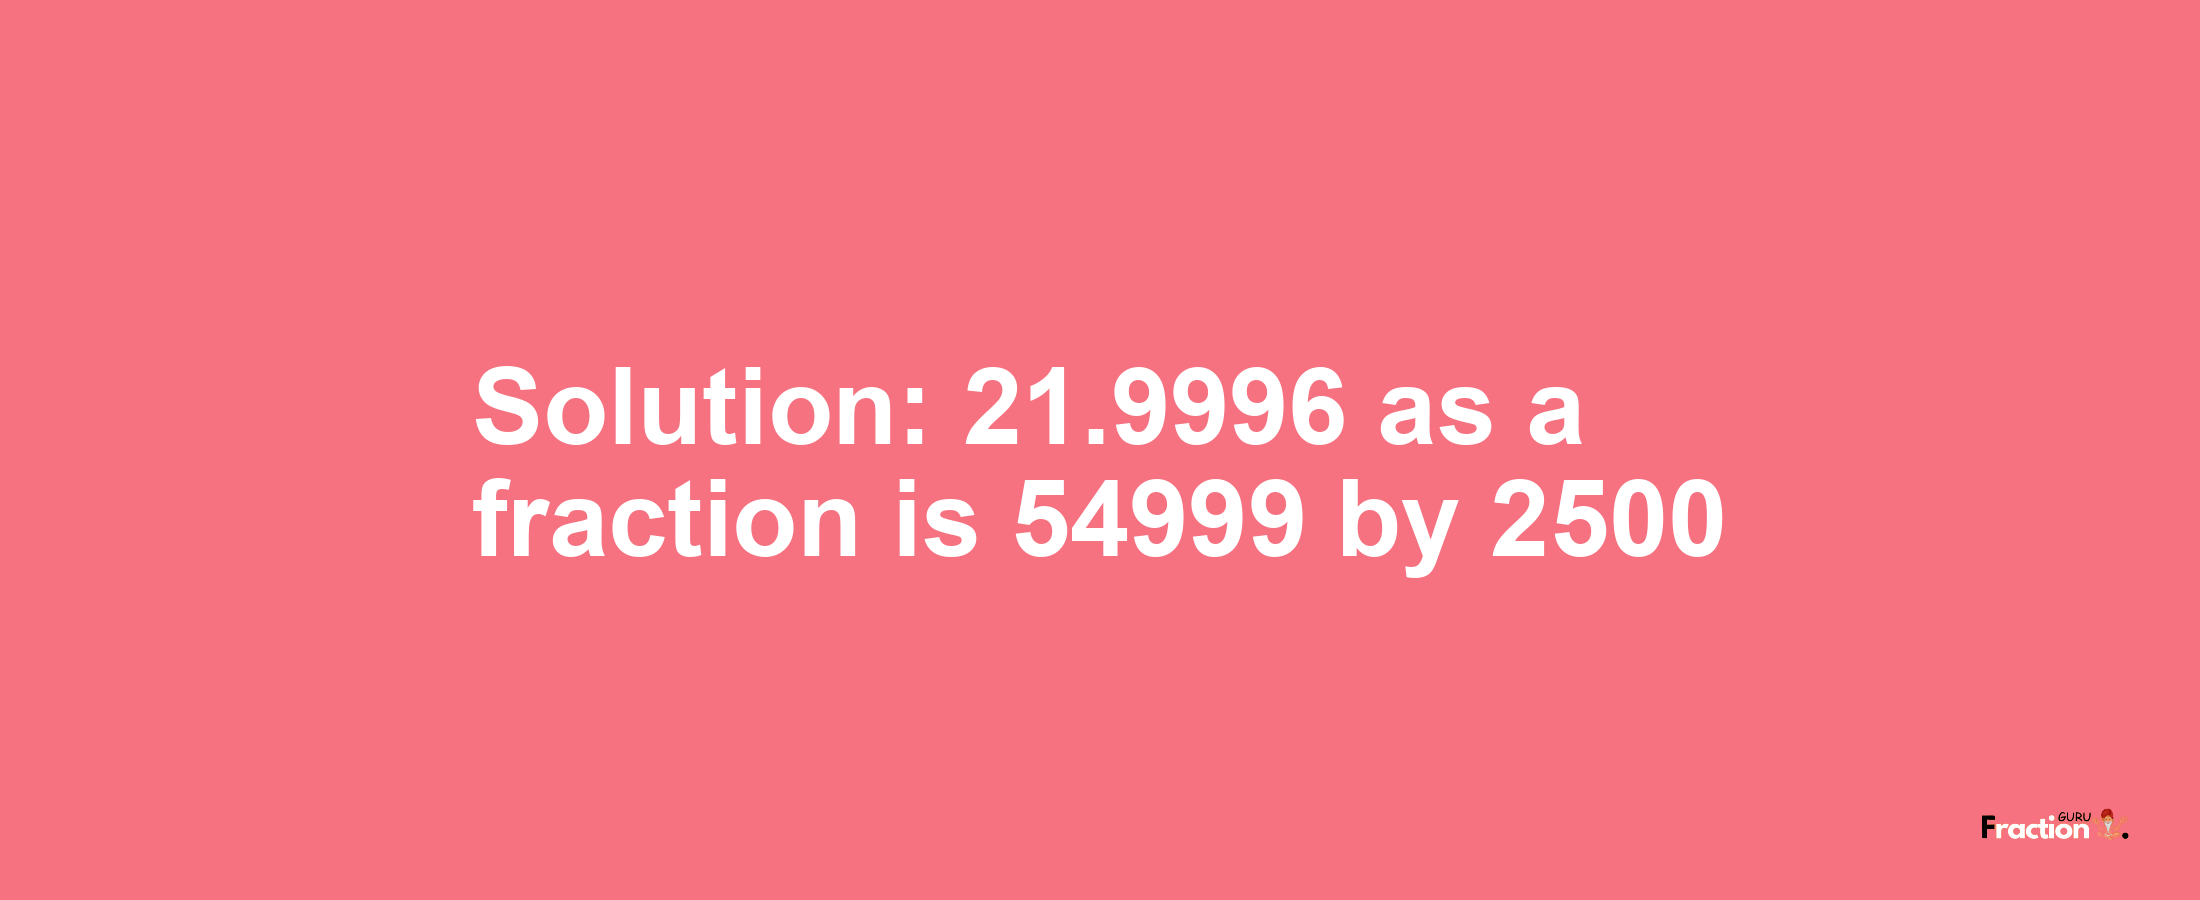 Solution:21.9996 as a fraction is 54999/2500